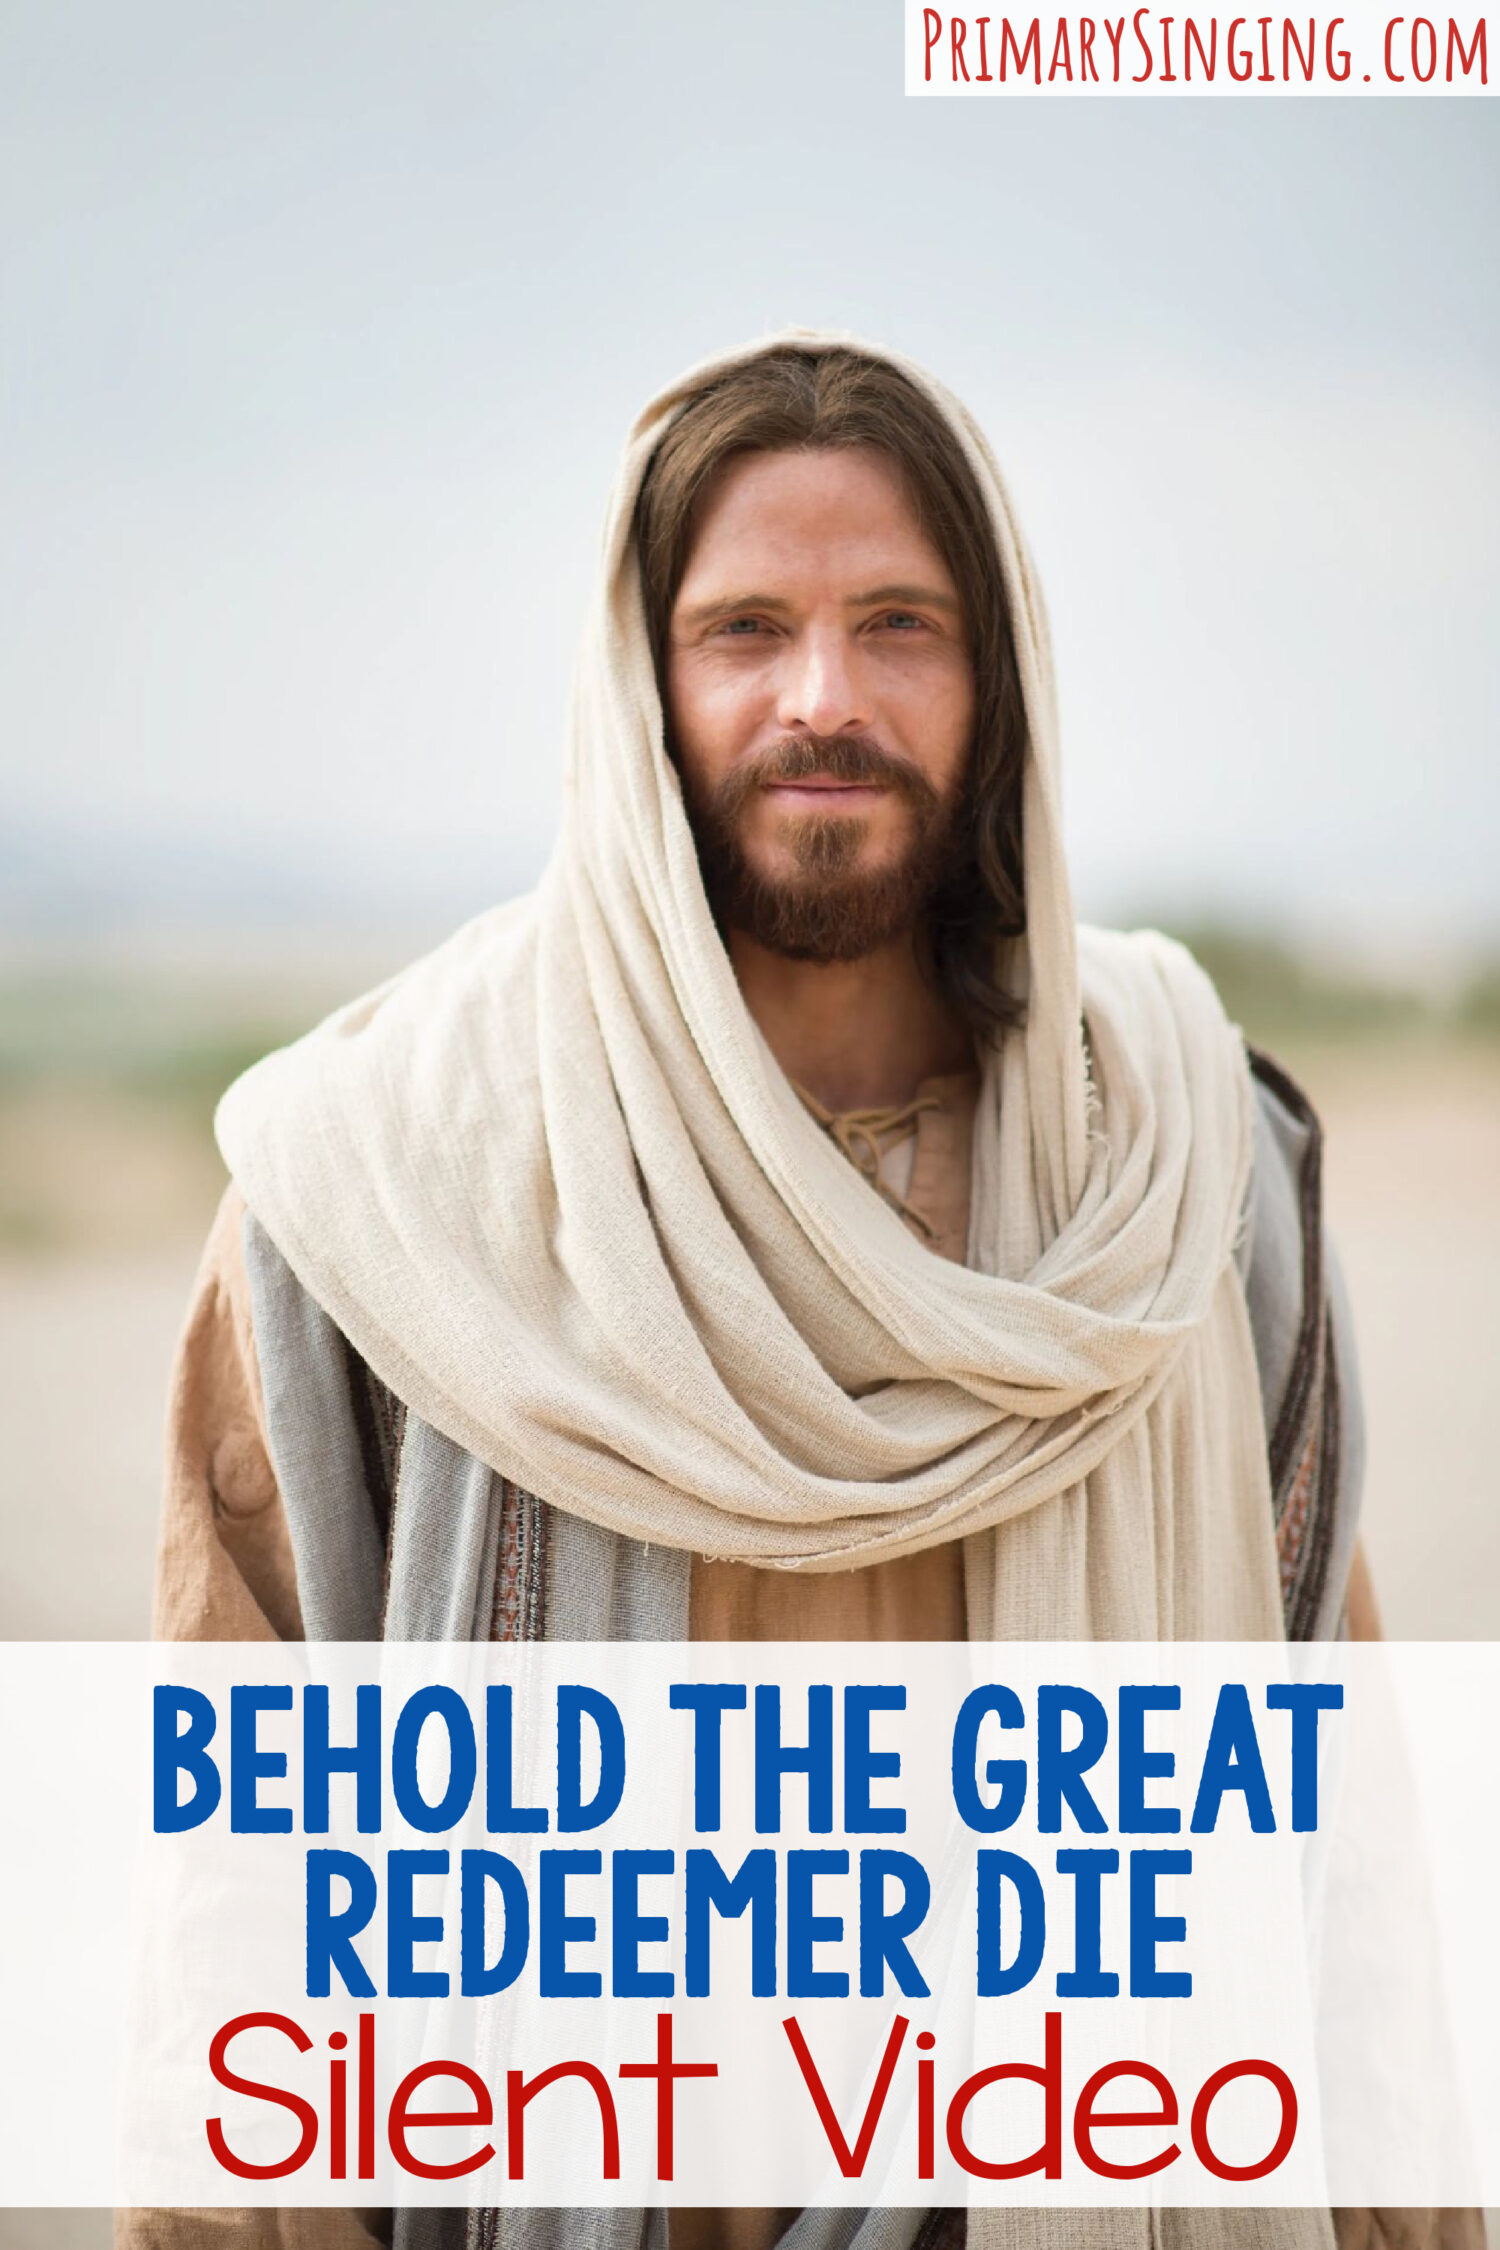 Behold the Great Redeemer Die Silent Video - use this spiritual connections activity with videos of Christ to introduce this Come Follow Me song for LDS Primary Music Leaders.